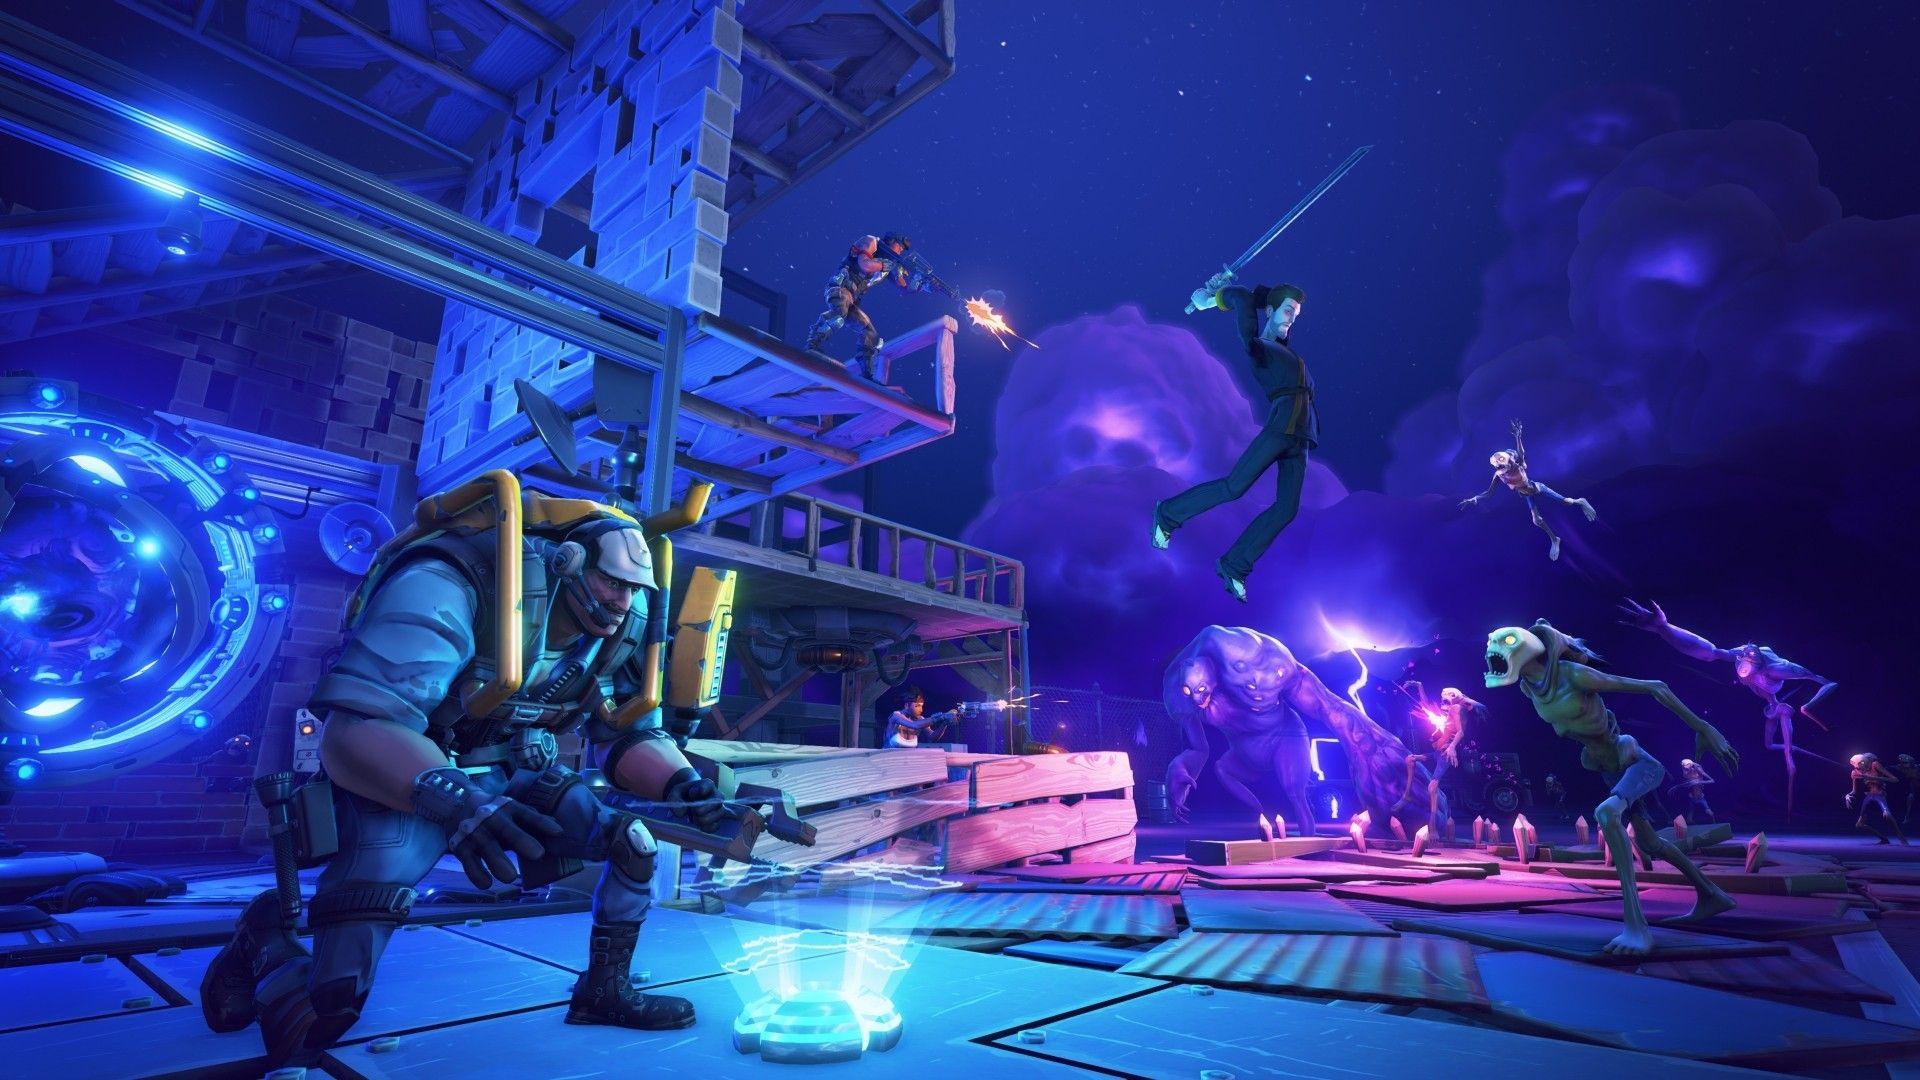 Fortnite Fans Want Console Cross Play. Why It's Not Likely